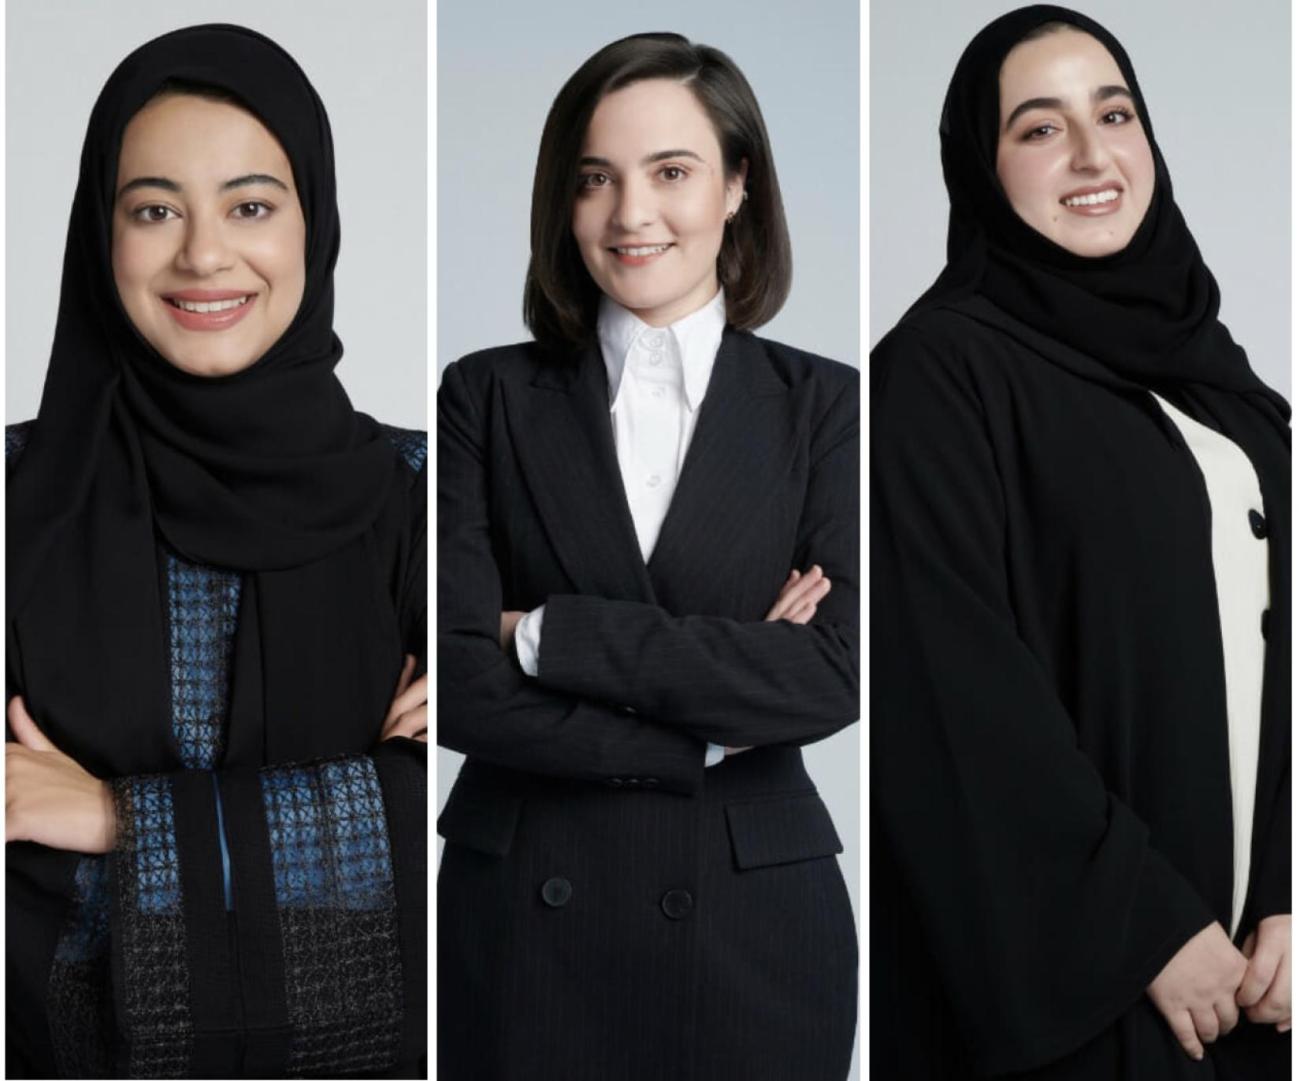 Three women in black clothes, two of them in headscarves smiling at the camera, side by side